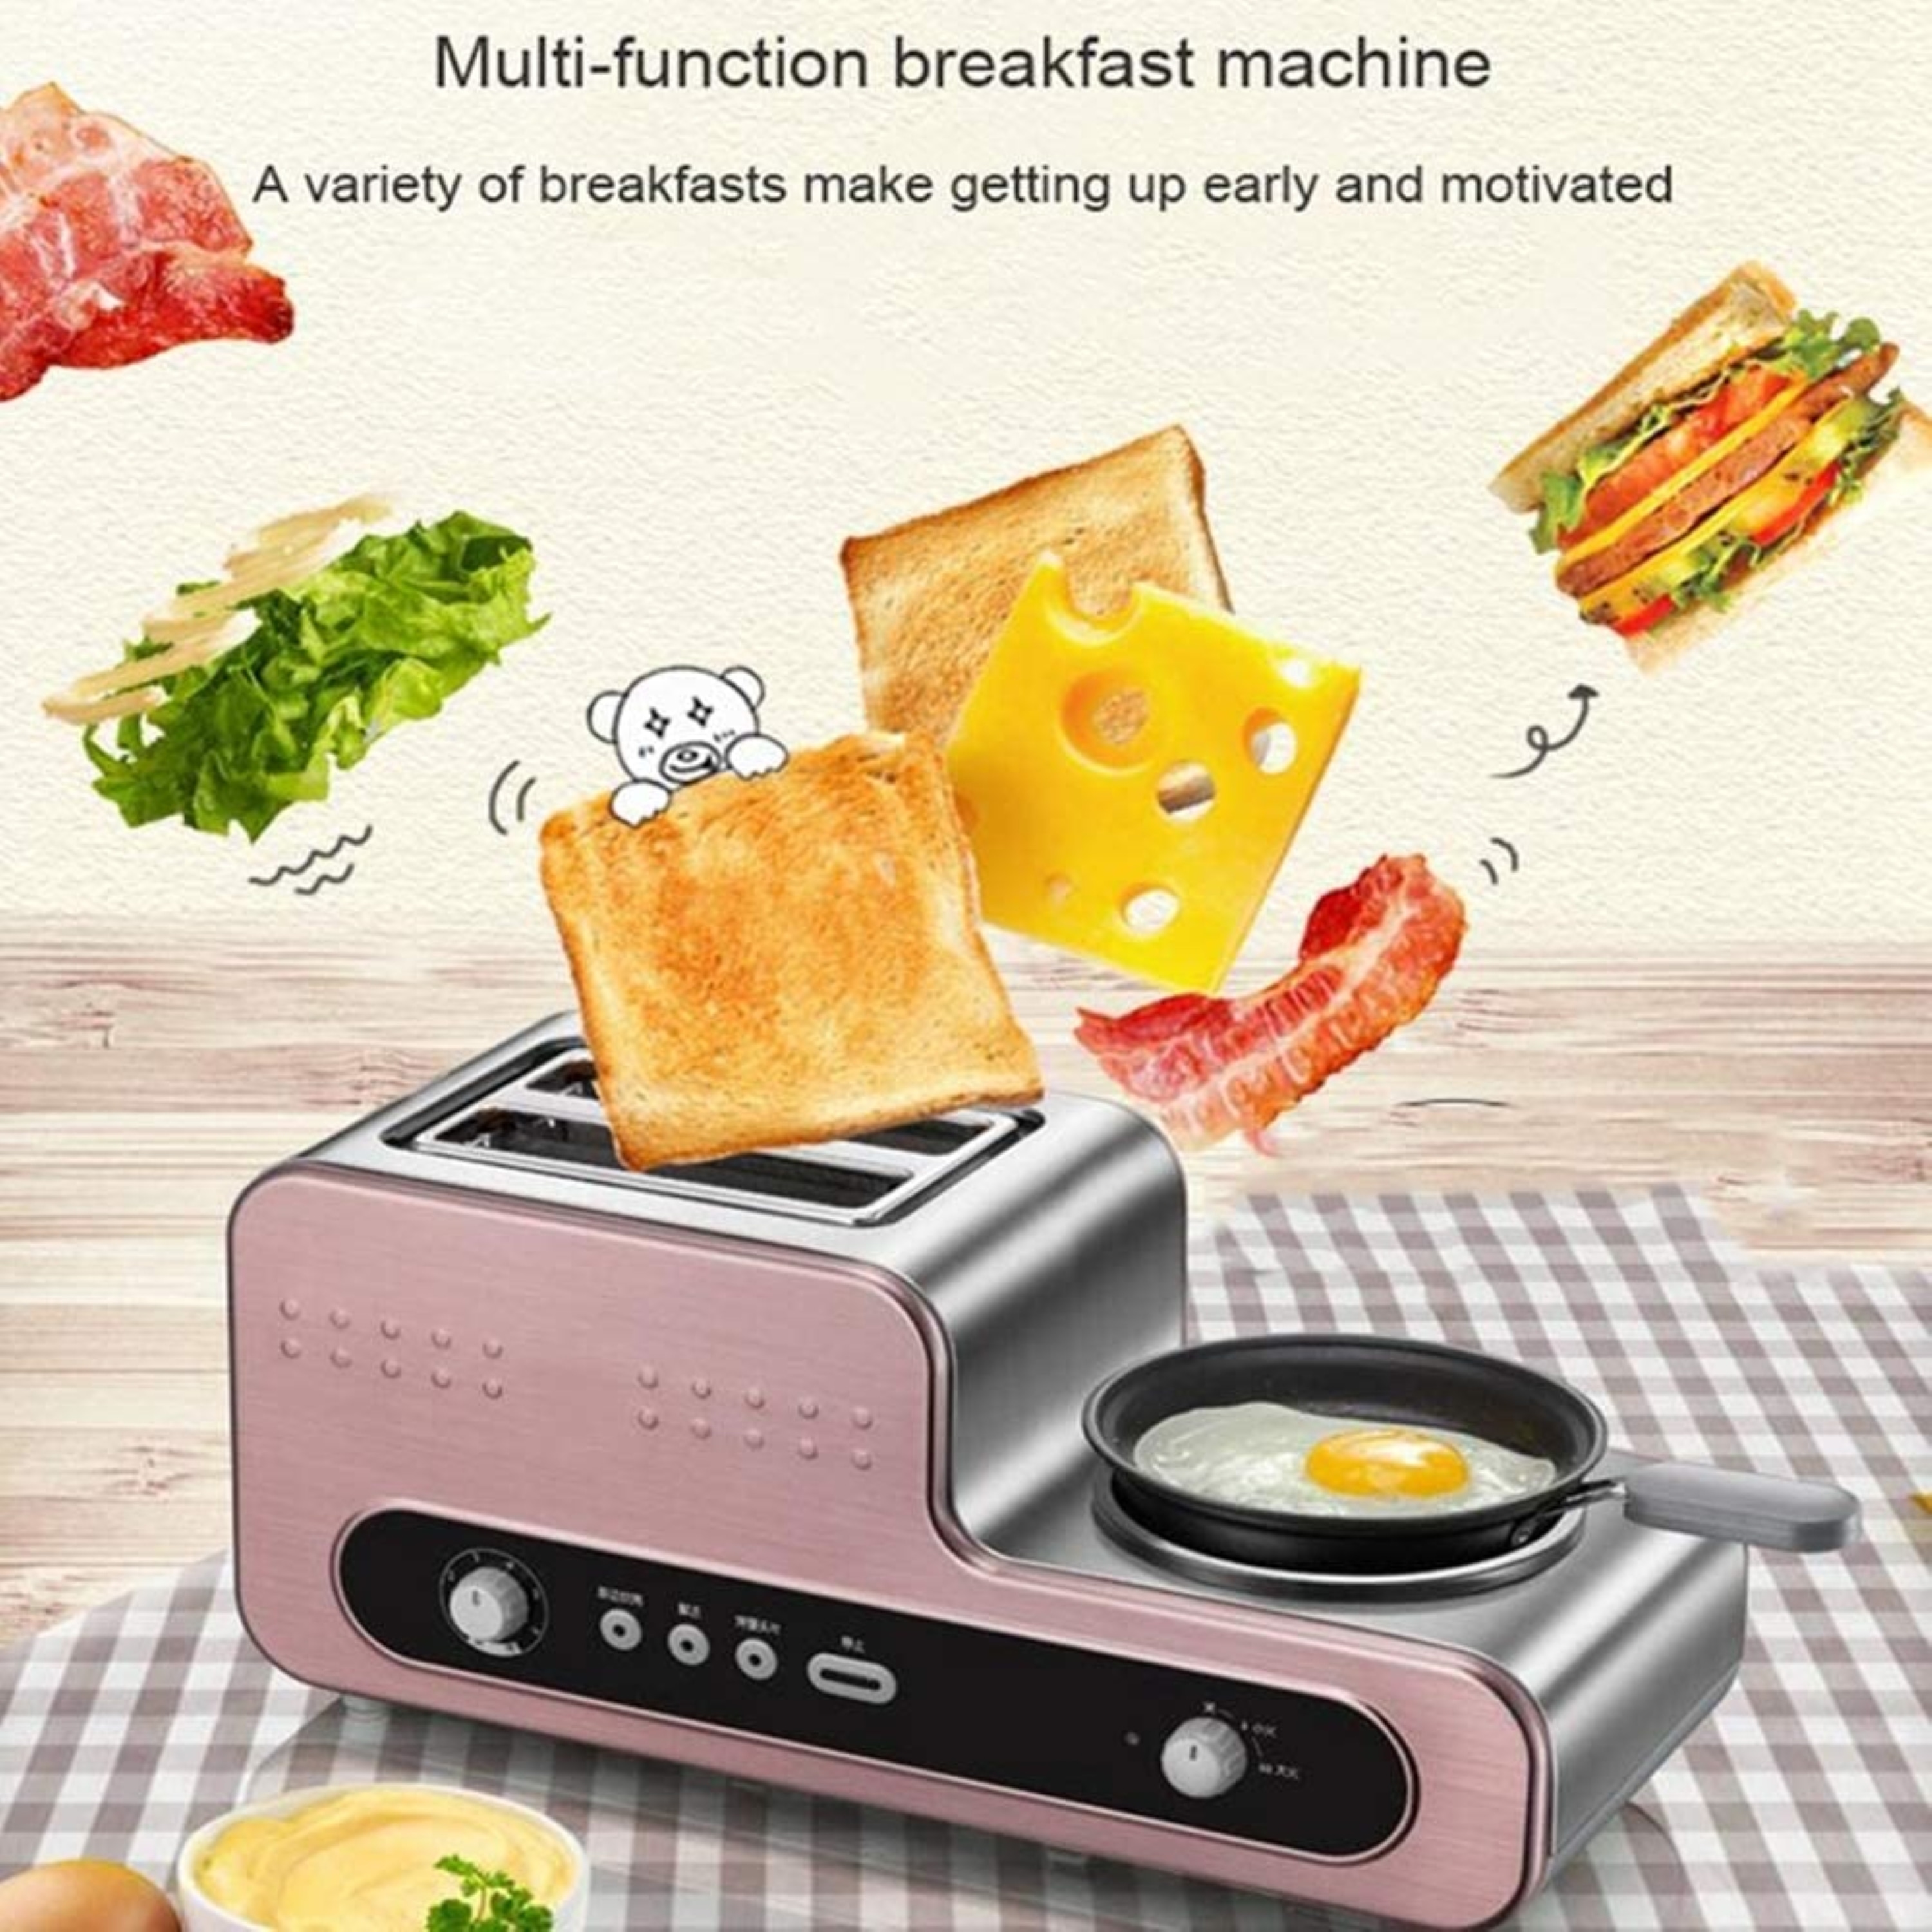 https://ak1.ostkcdn.com/images/products/is/images/direct/c96d4f718bd750b03269cfb5214b21ac362f7ad5/Egg-Boiler-Multifunction-Breakfast-Maker-Bread-Baking-Machine-2-Slices-Toaster-Oven.jpg